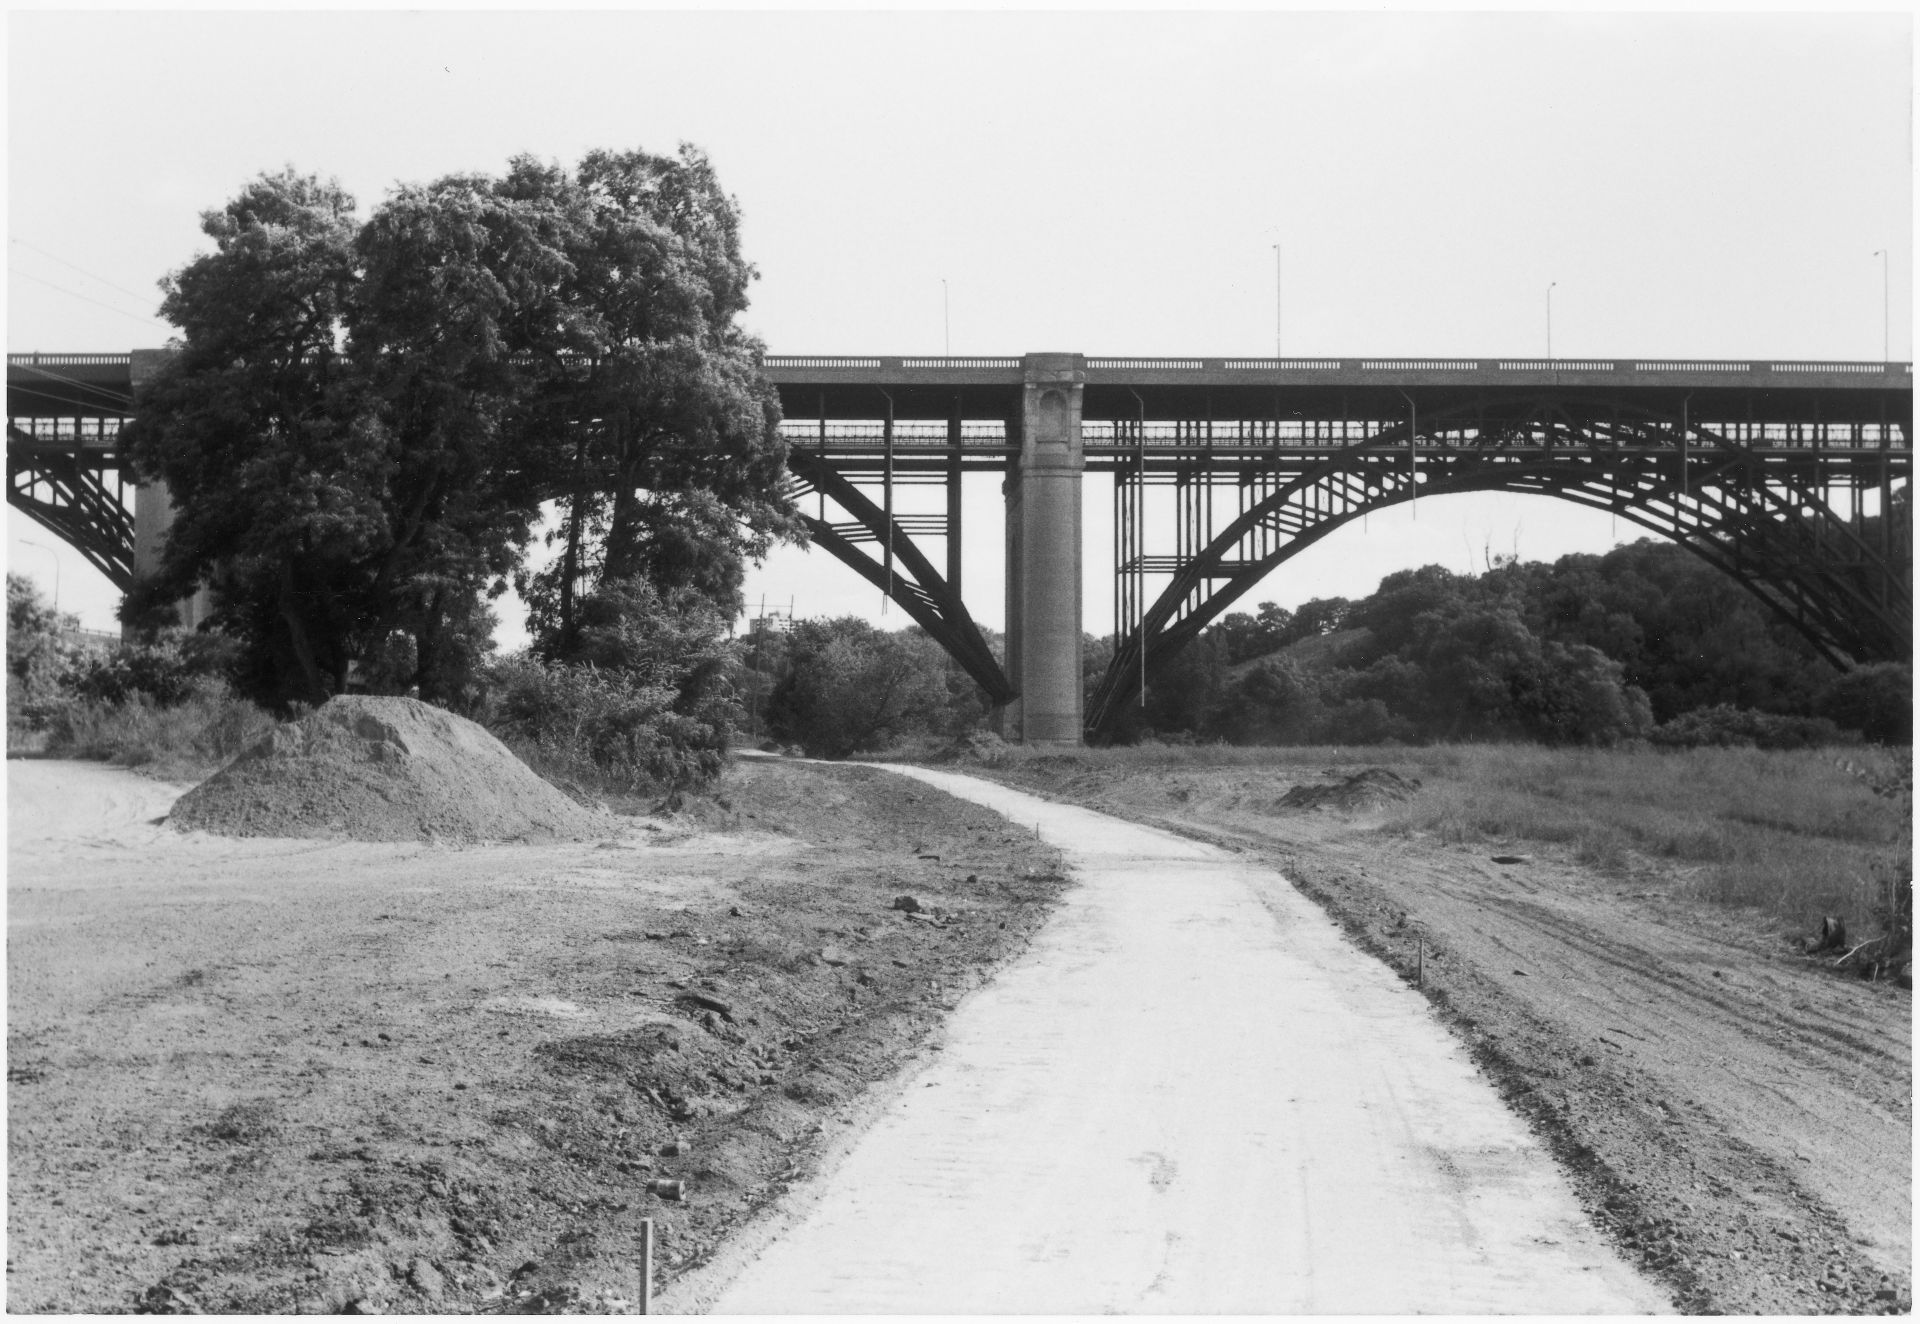 Side View of the Bloor Street Bridge in 1984. City of Toronto Archives, Fonds 268, File 7, Item 11.